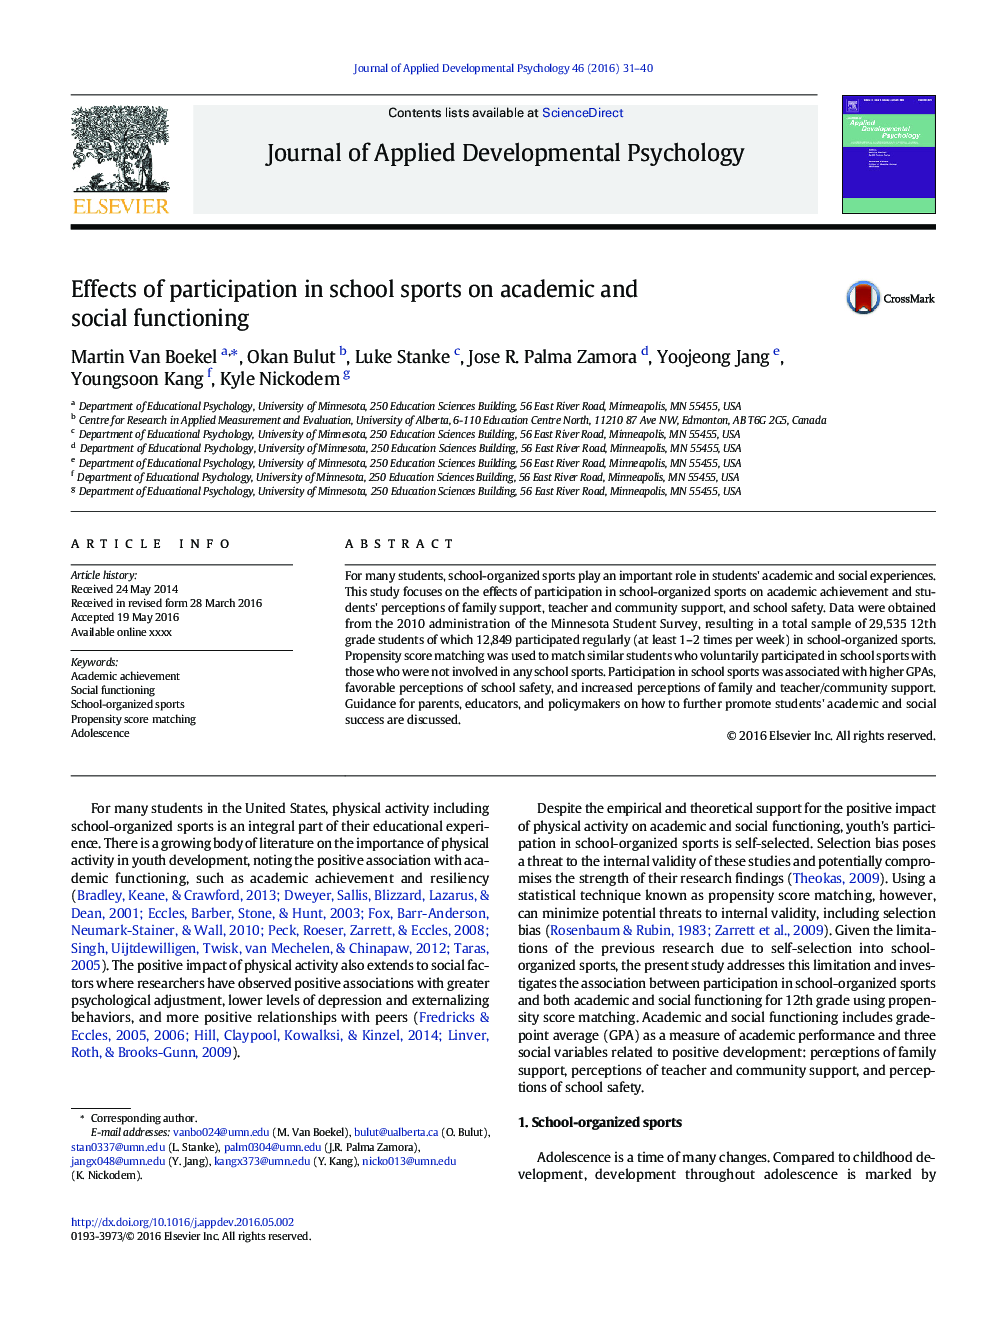 Effects of participation in school sports on academic and social functioning